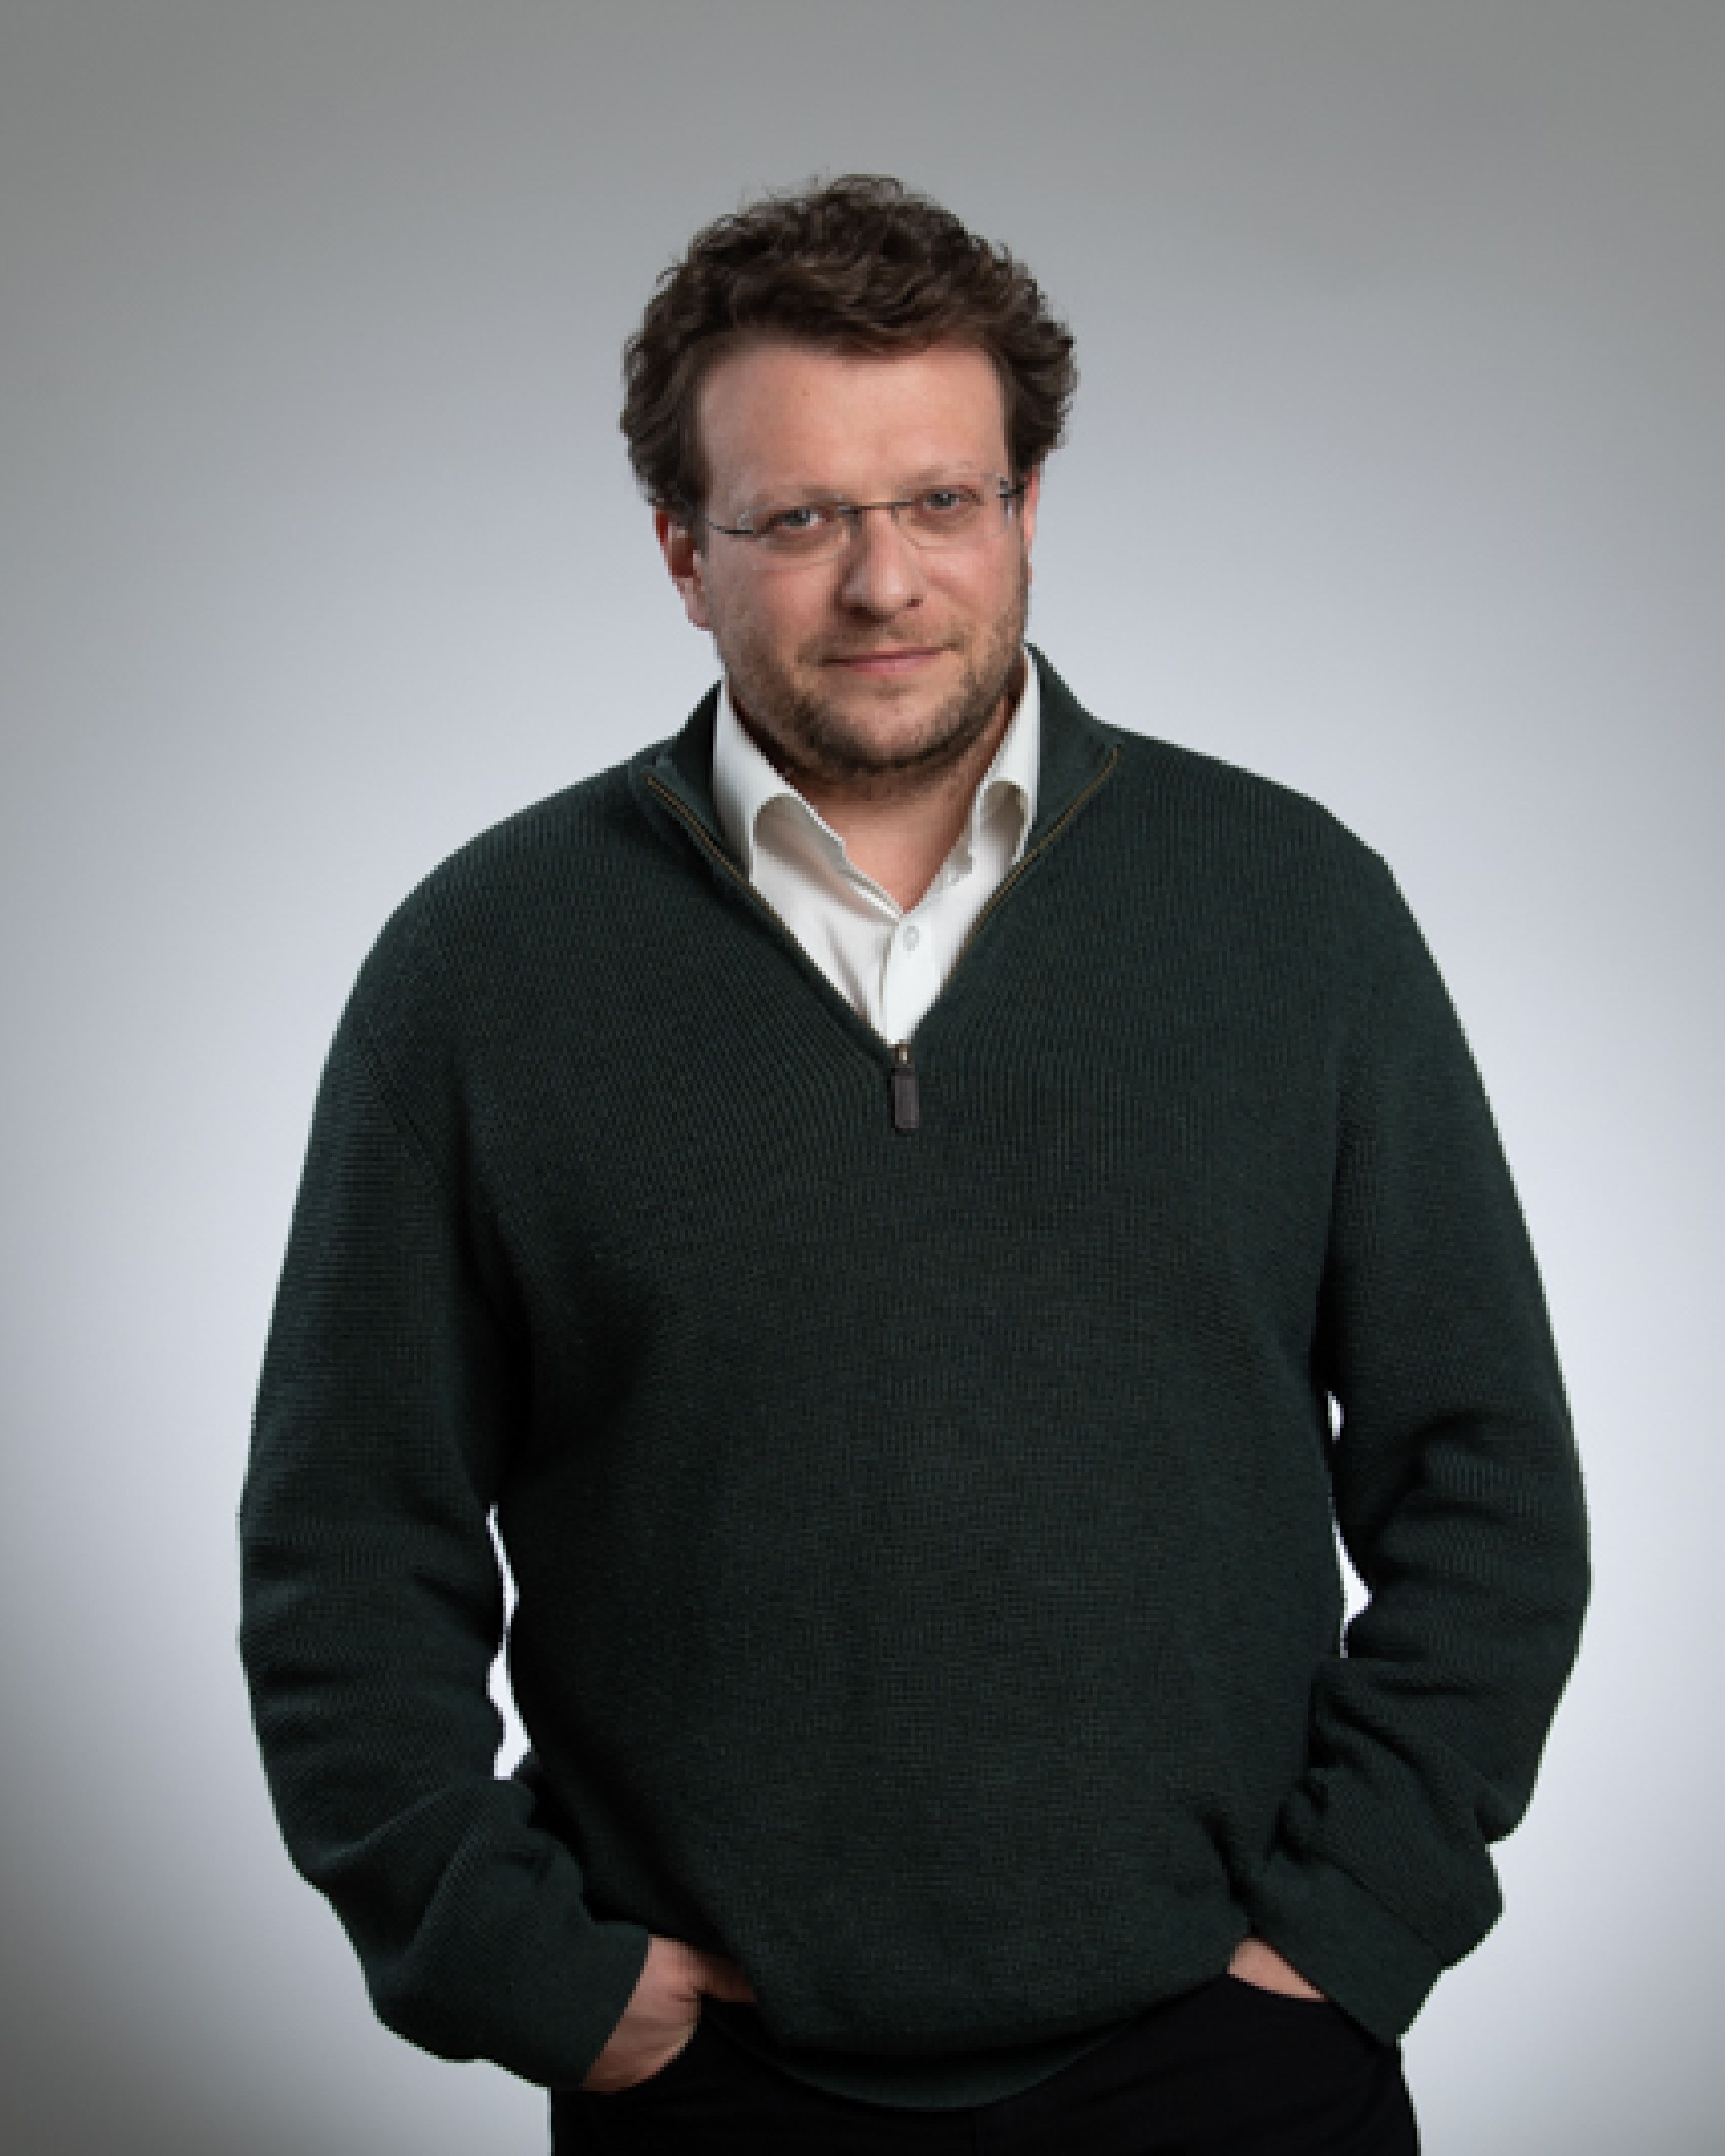 Photograph of Peter Pomerantsev, journalist and author.